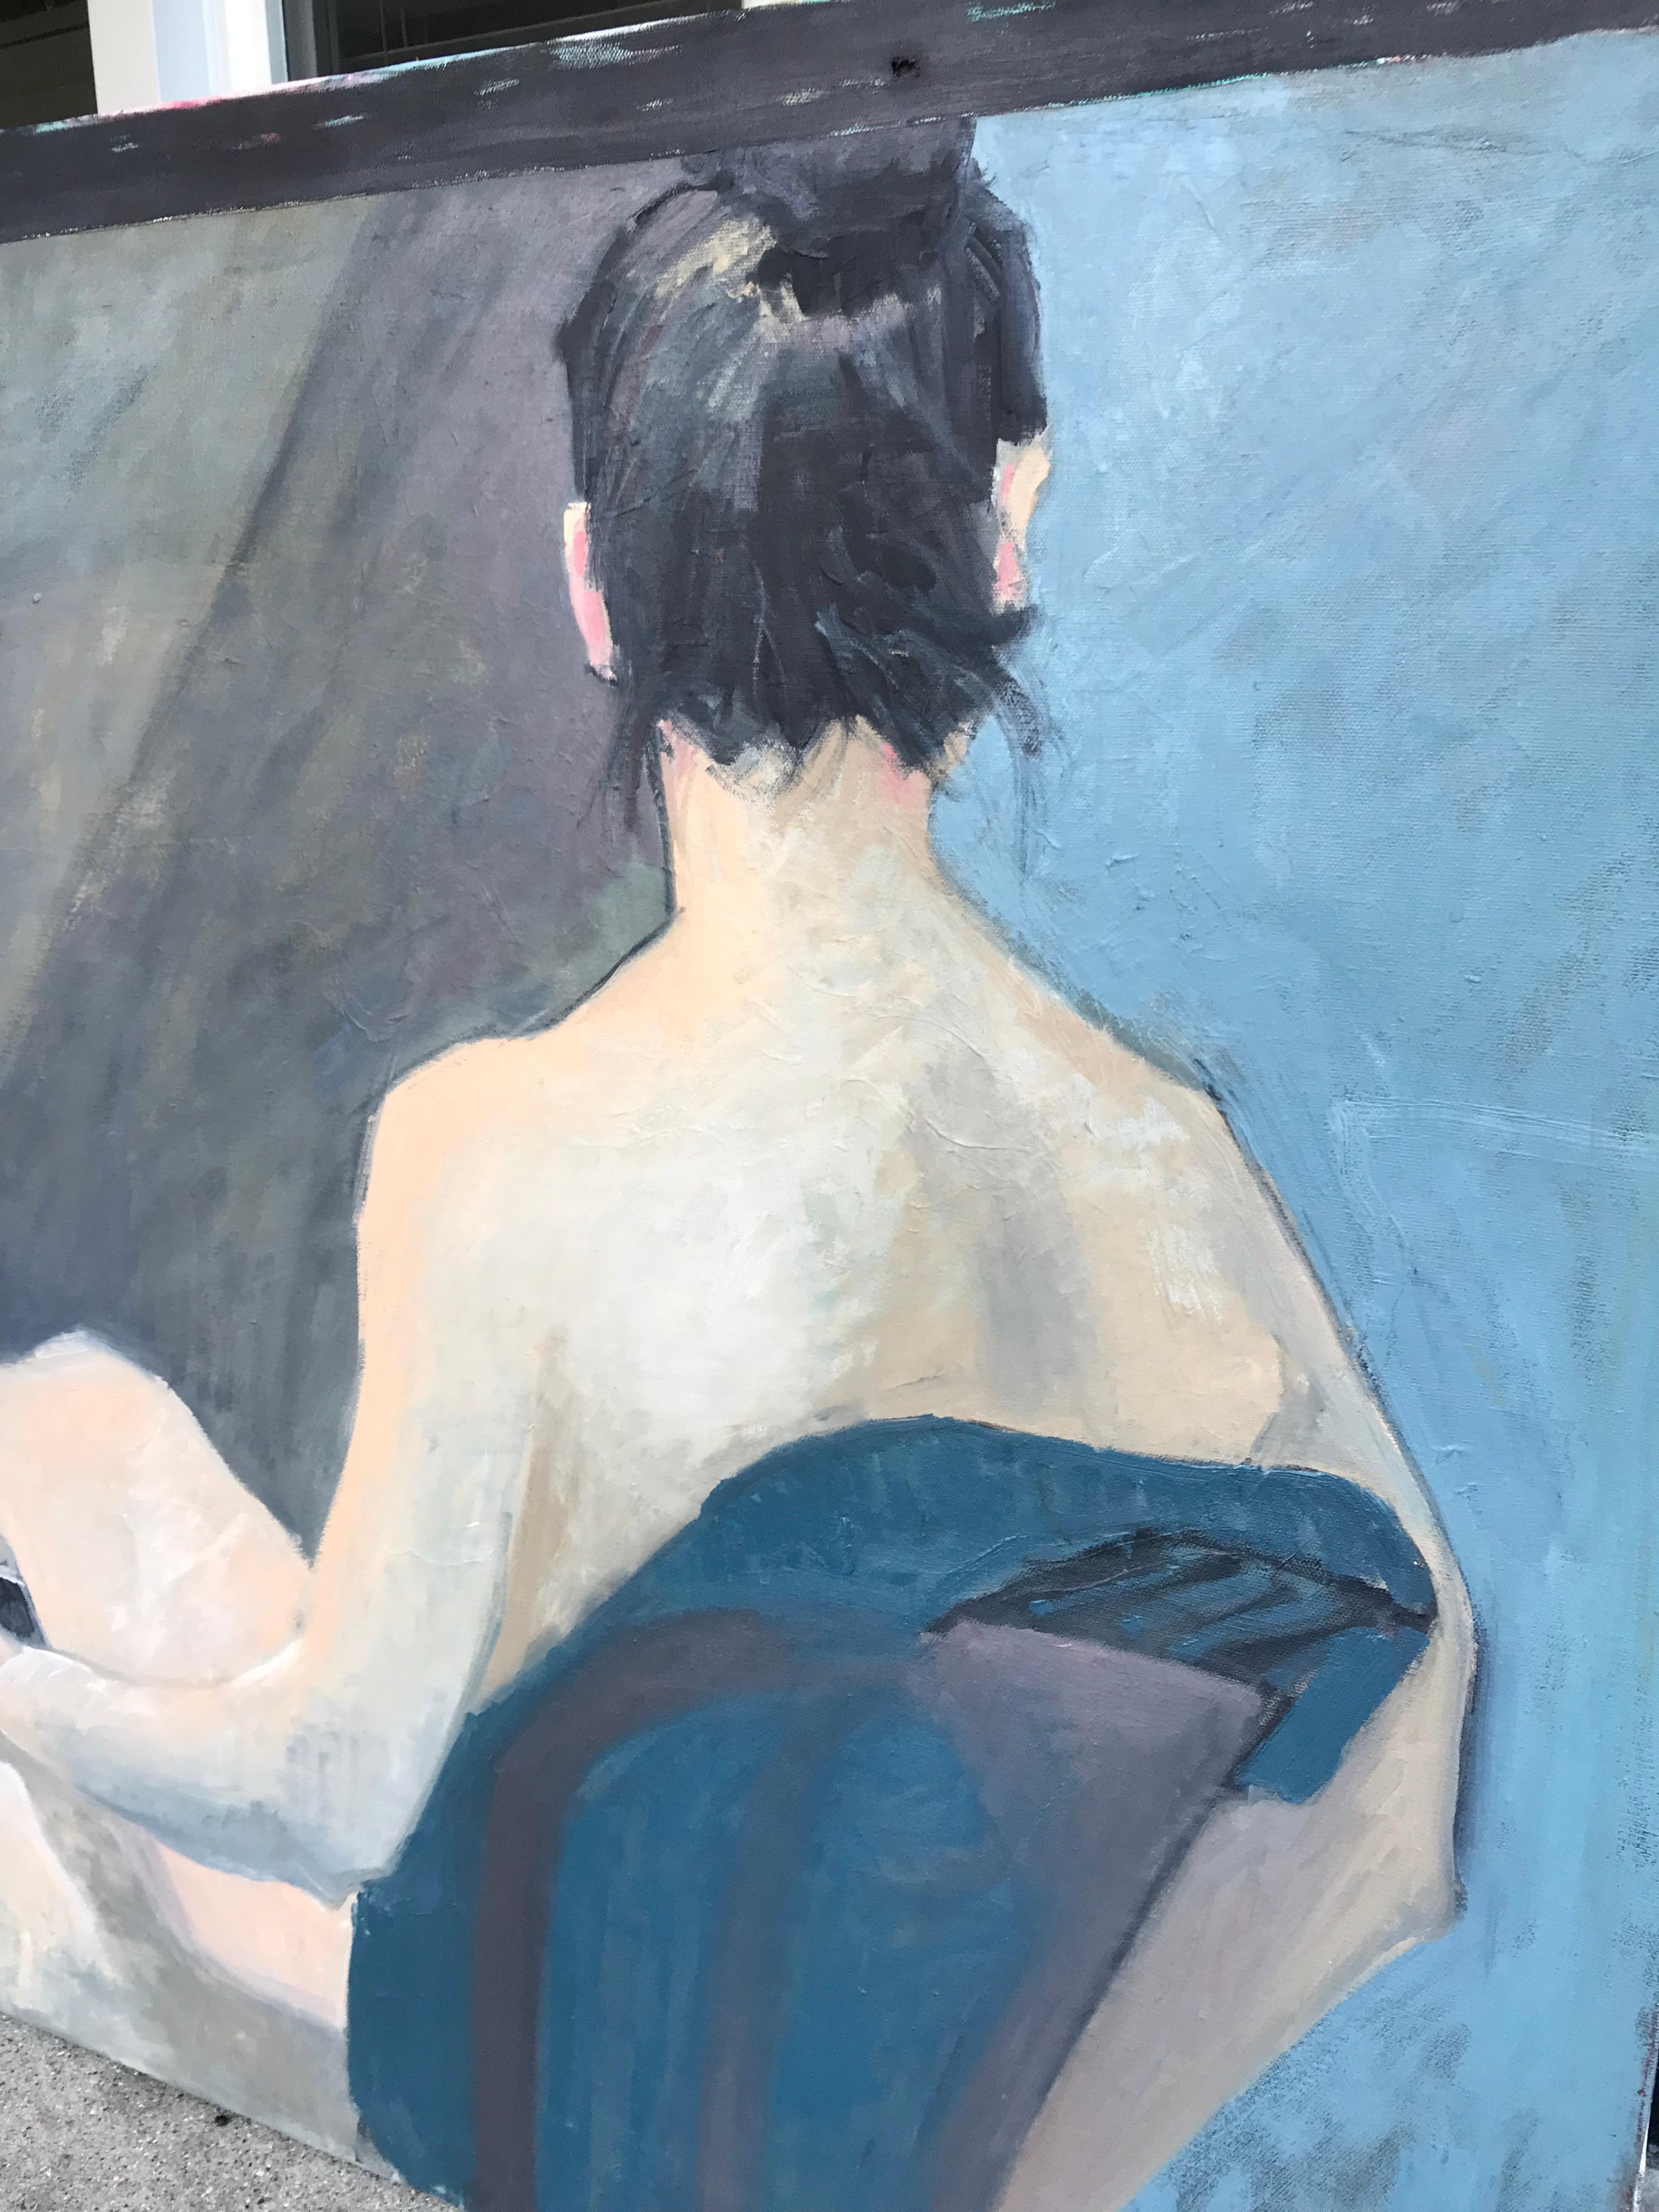 Mysterious woman sitting in the nude. A moody use of blues and grays capture a seductive, yet romantic scene. Oil on stretched canvas.